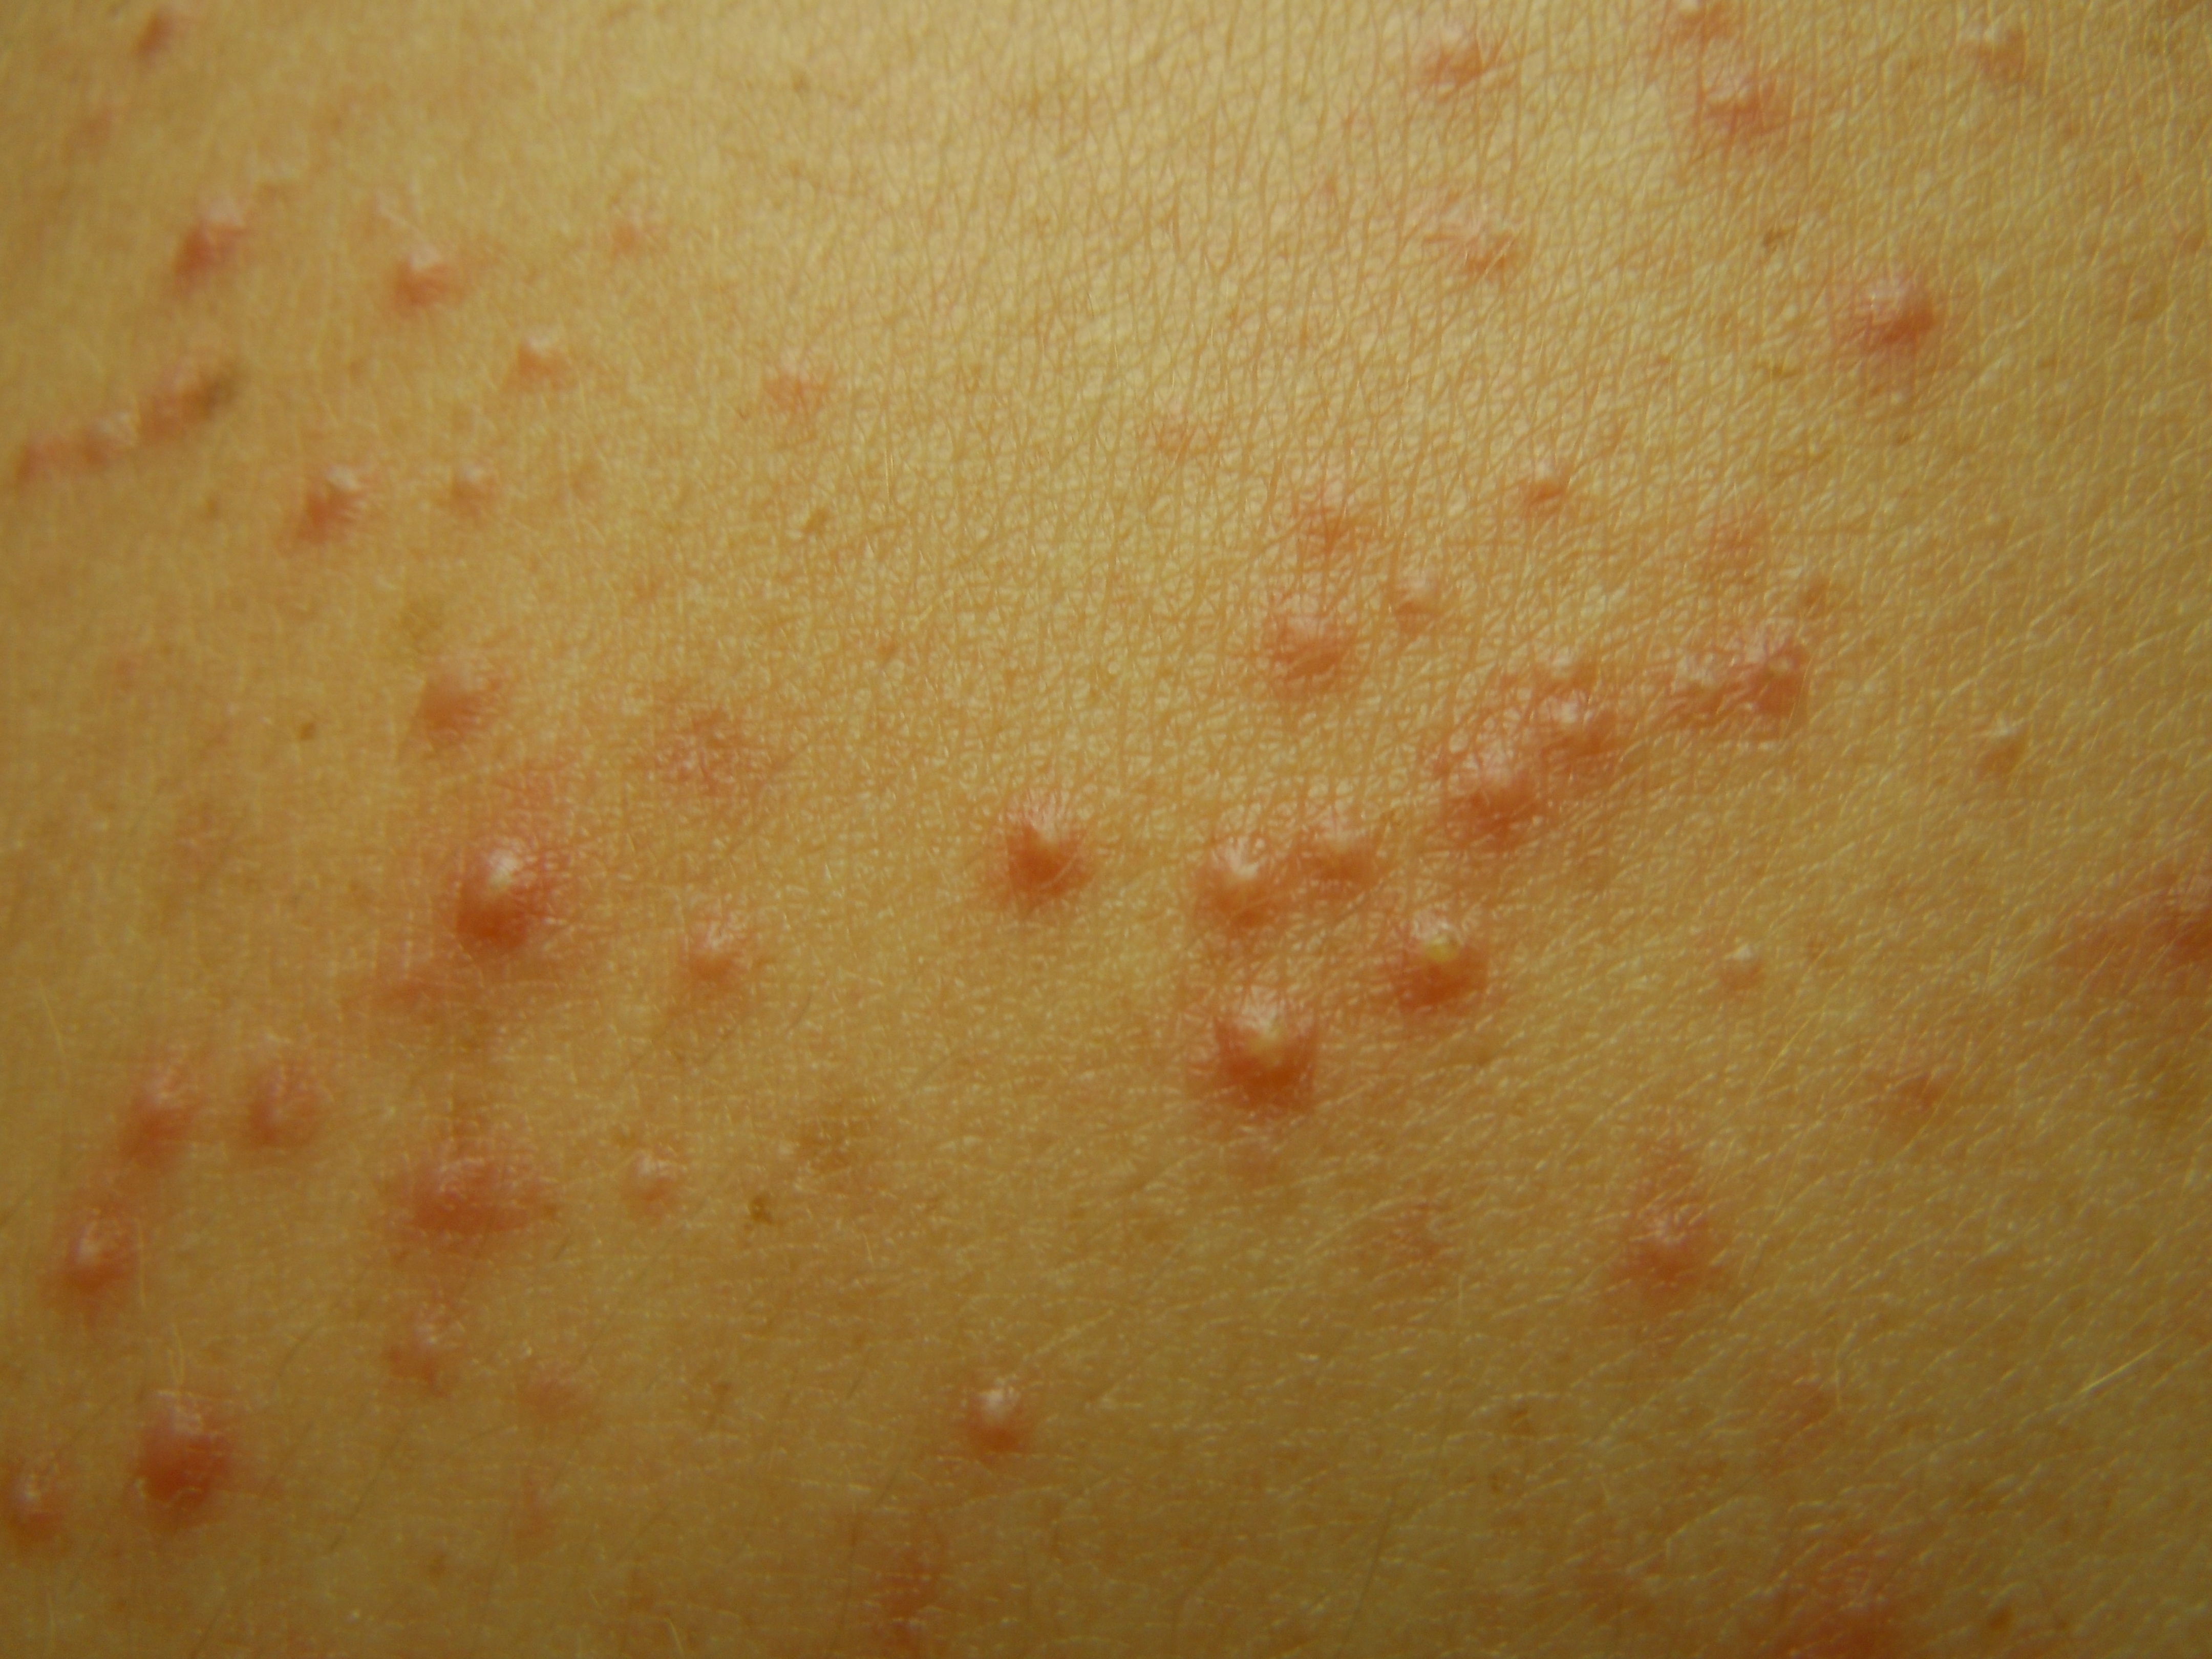 pinprick red dots, itchy skin, wrongly diagnosed - Skin ...